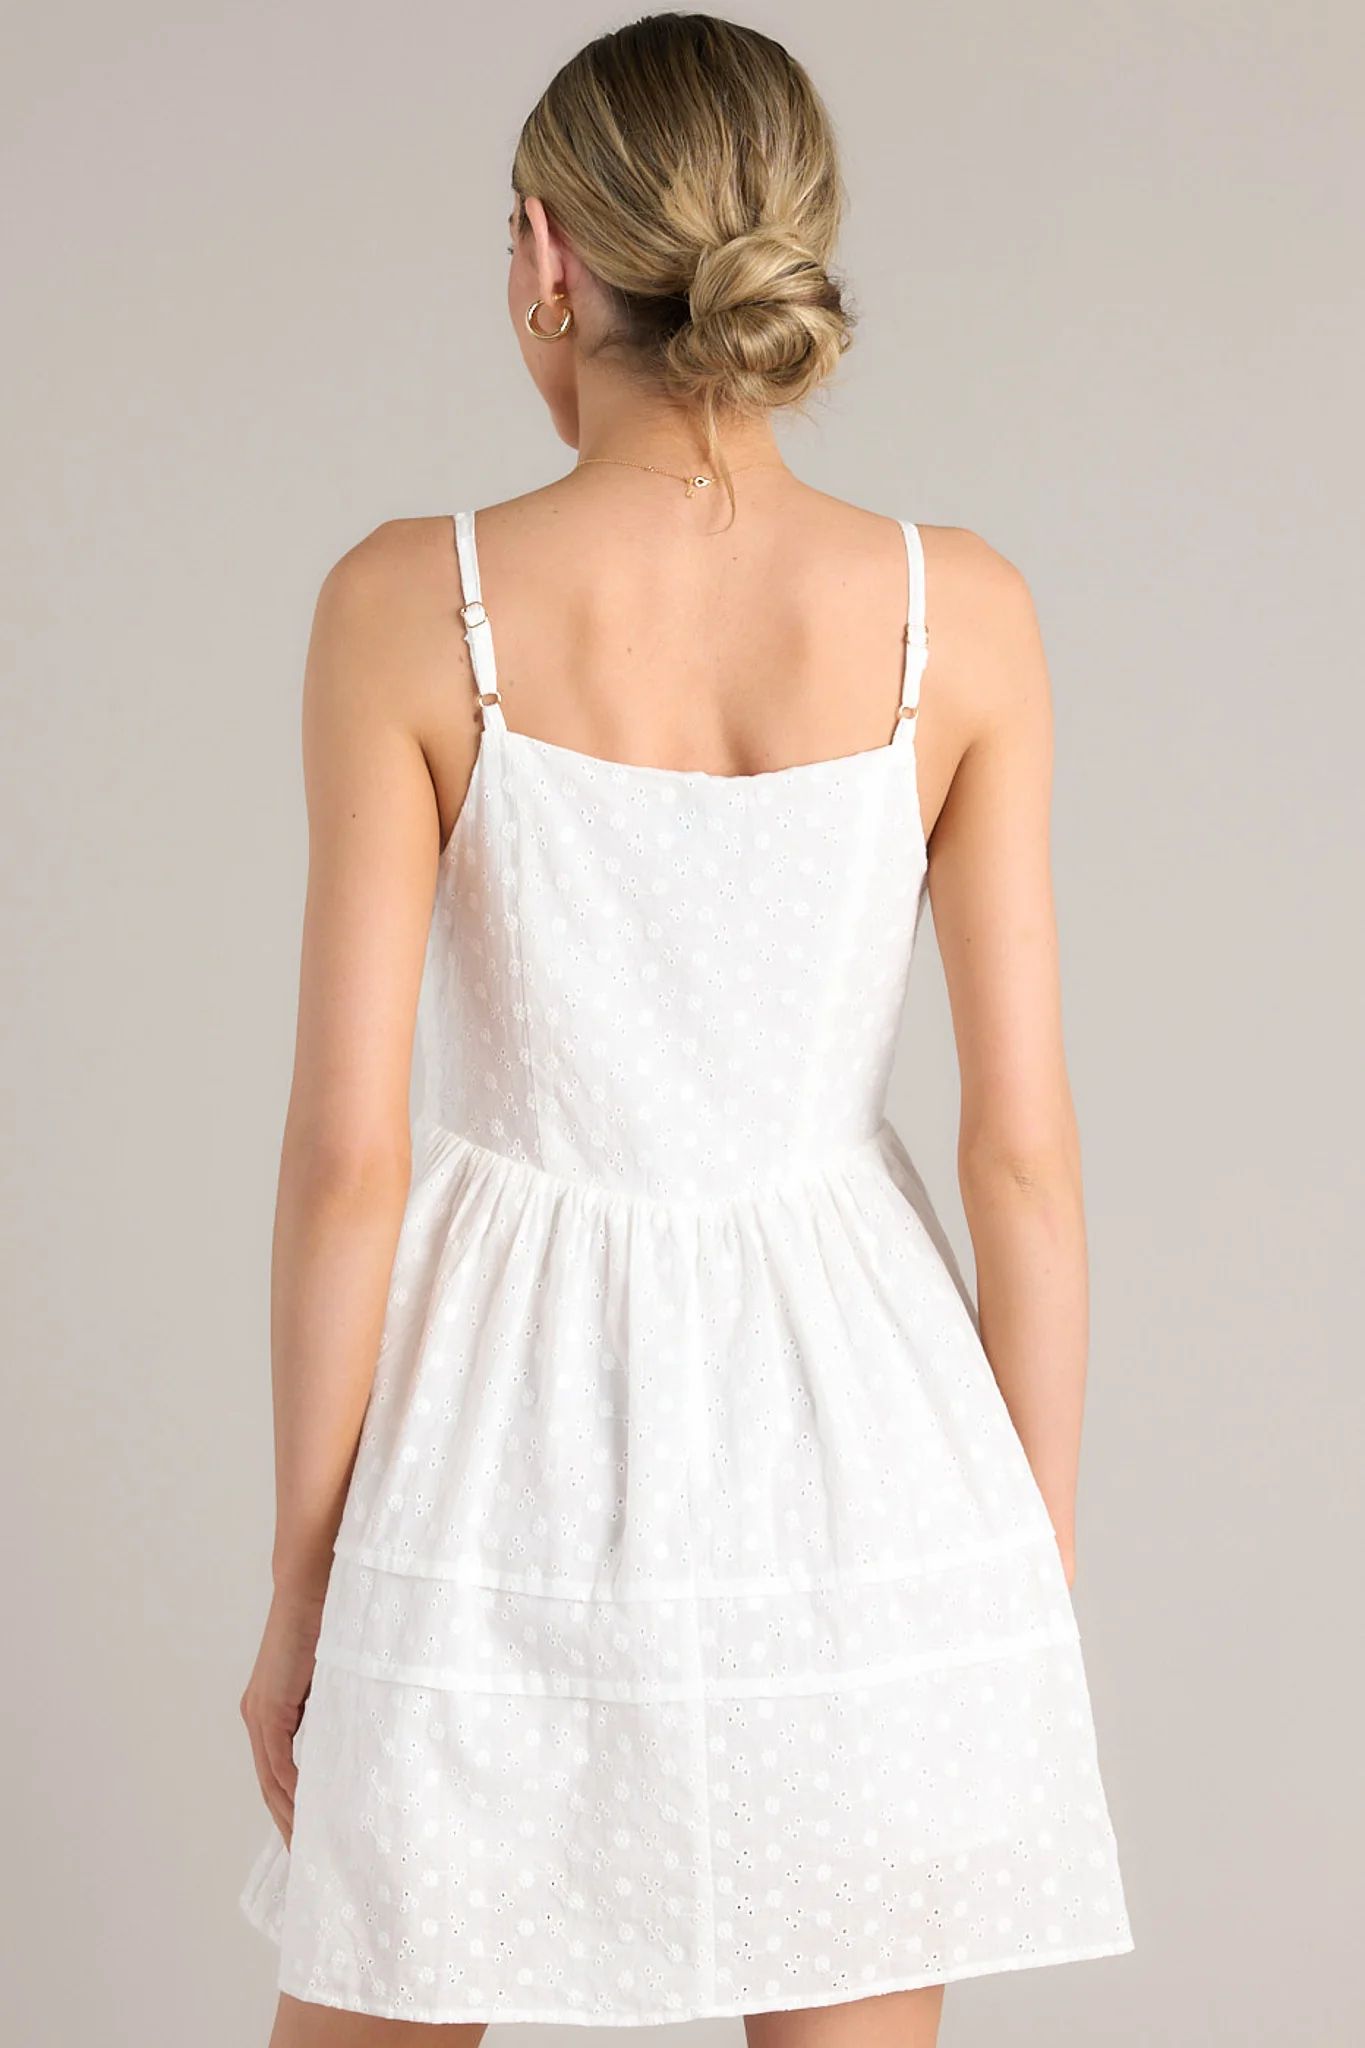 At The Wishing Well White Eyelet Dress | Red Dress